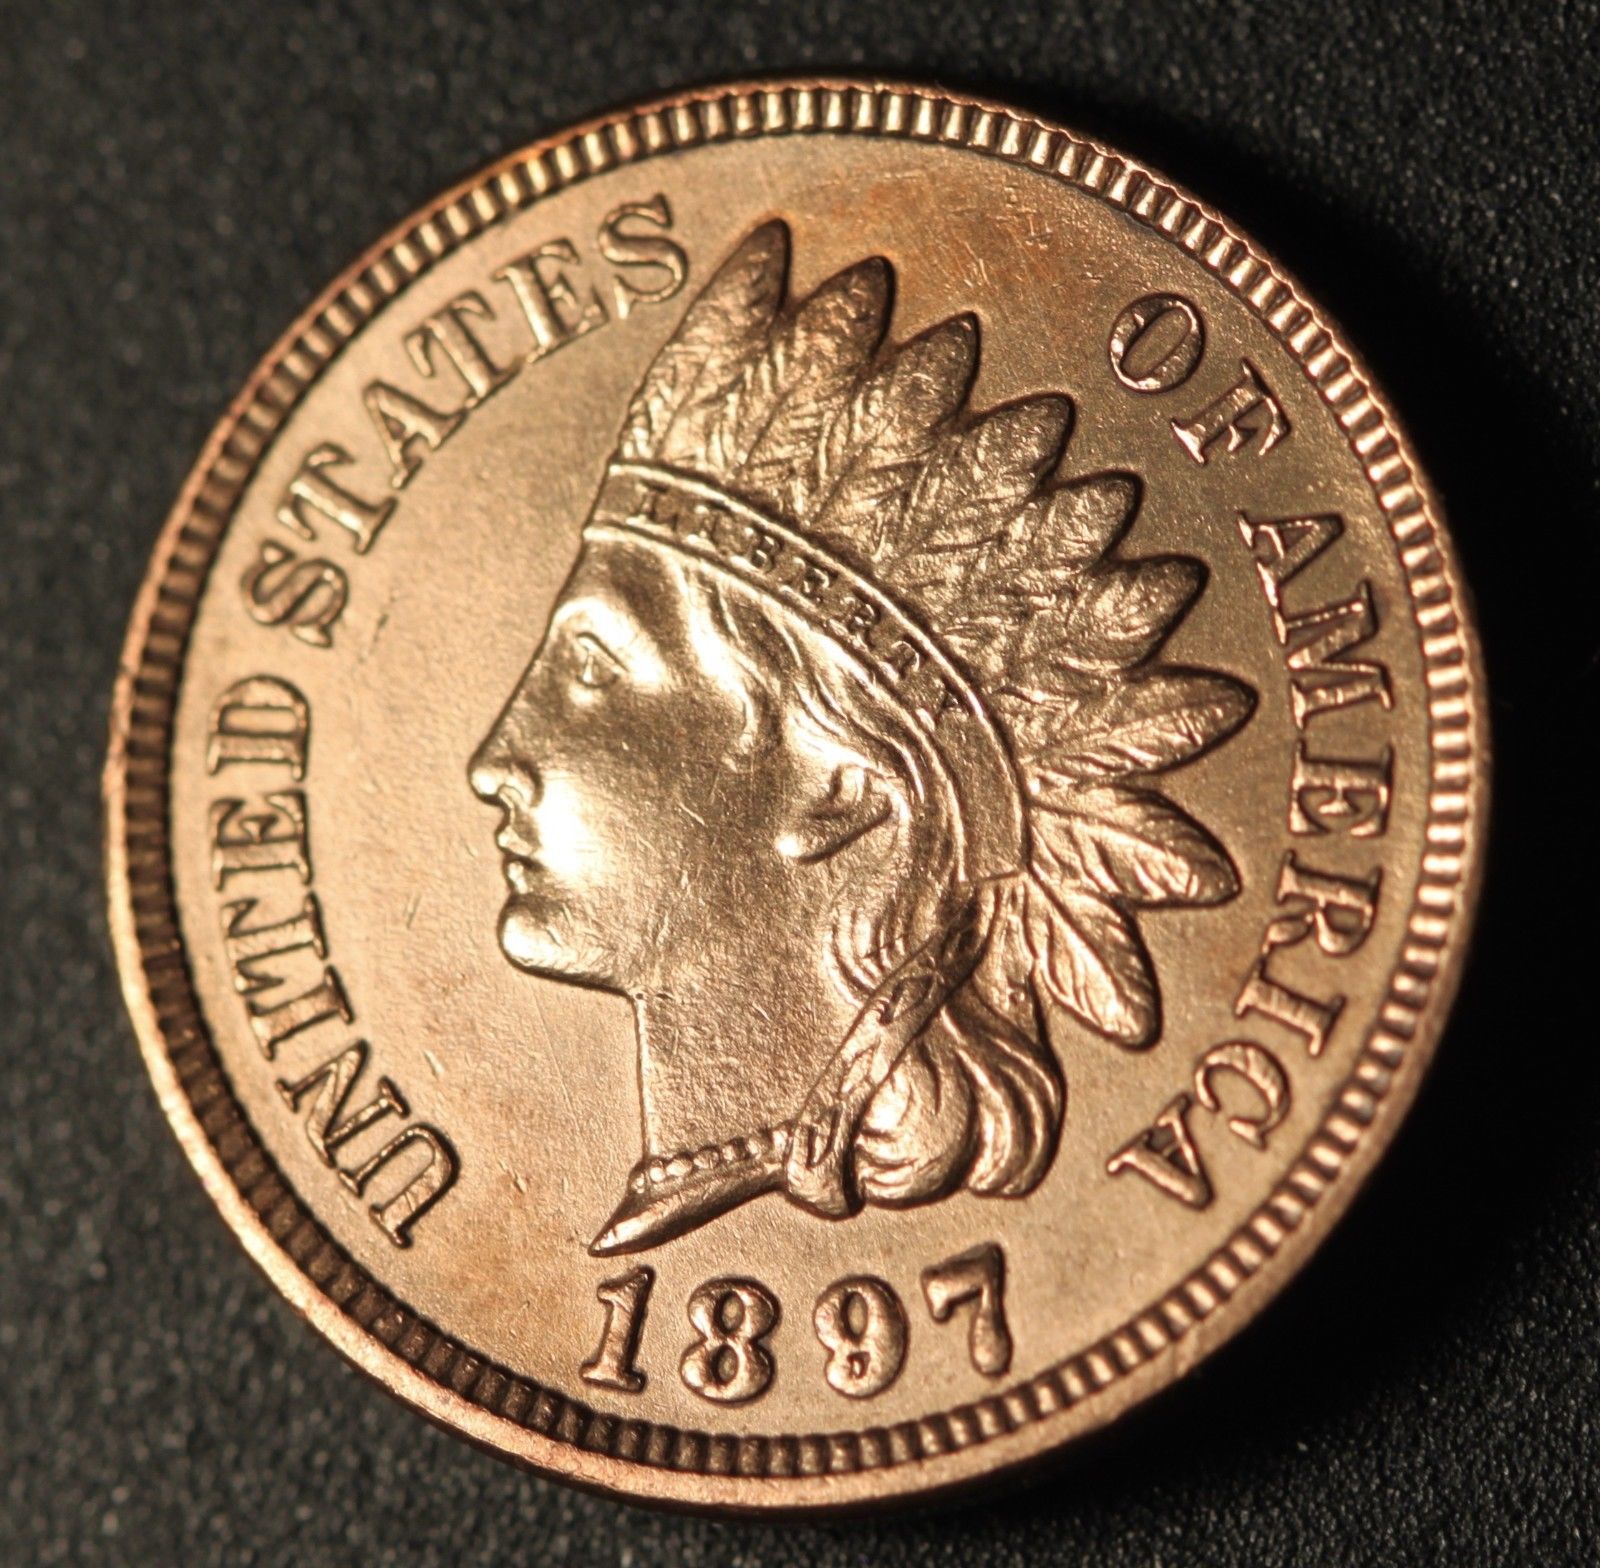 1897 RPD-006 - Indian Head Penny - Photo by Ed Nathanson